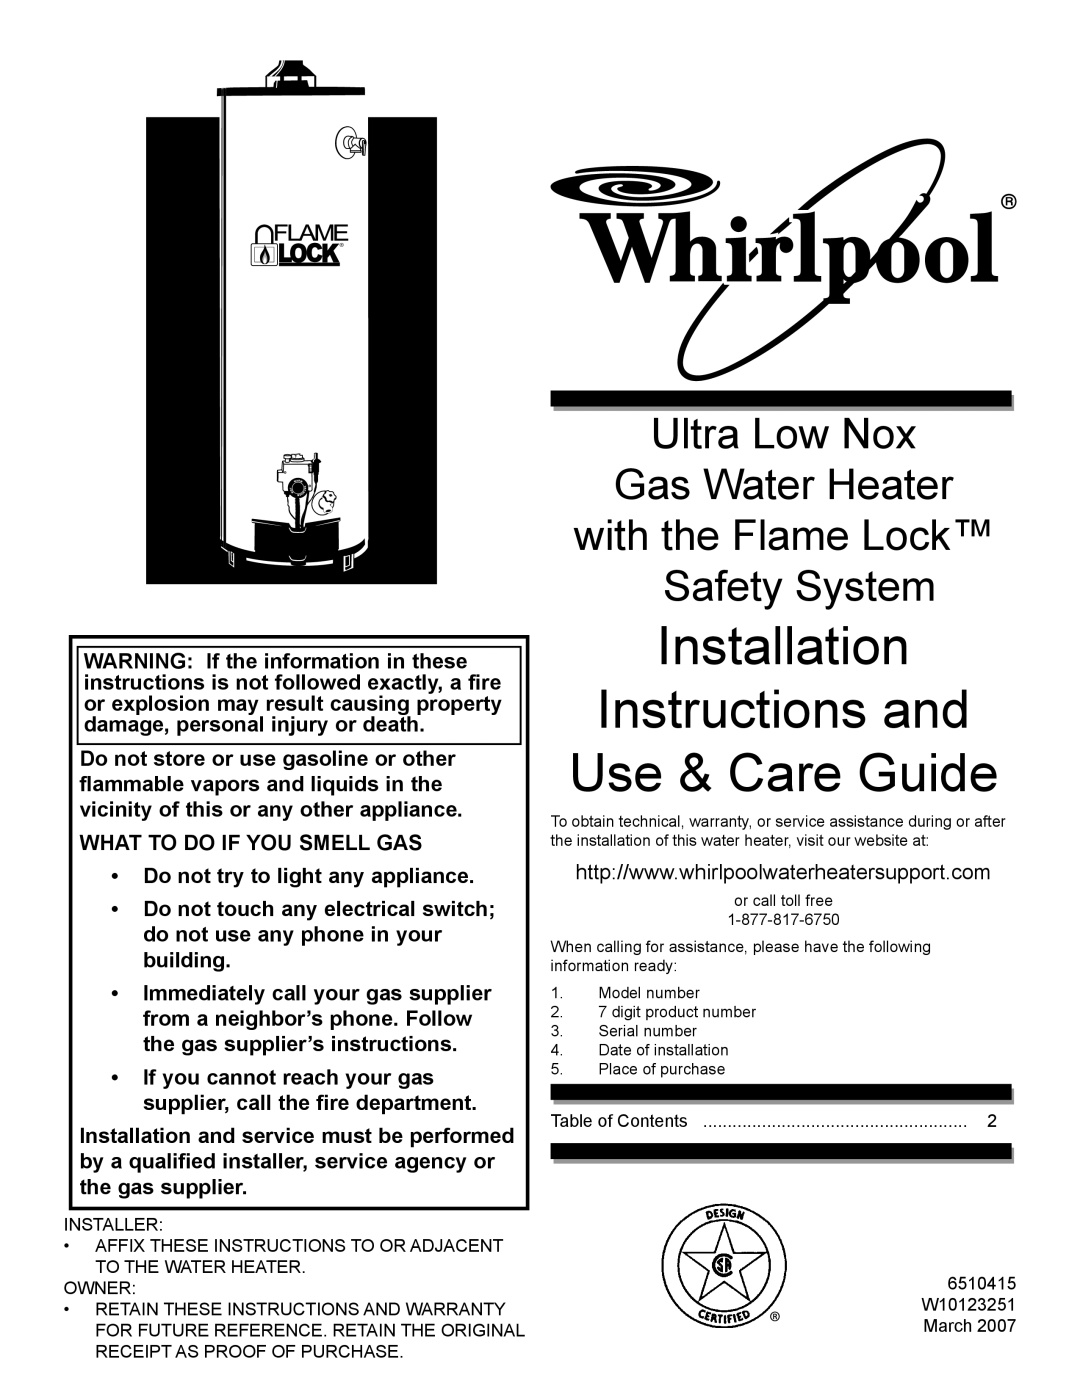 Whirlpool 285256 installation instructions Installation Instructions and Use & Care Guide, Ultra Low Nox Gas Water Heater 